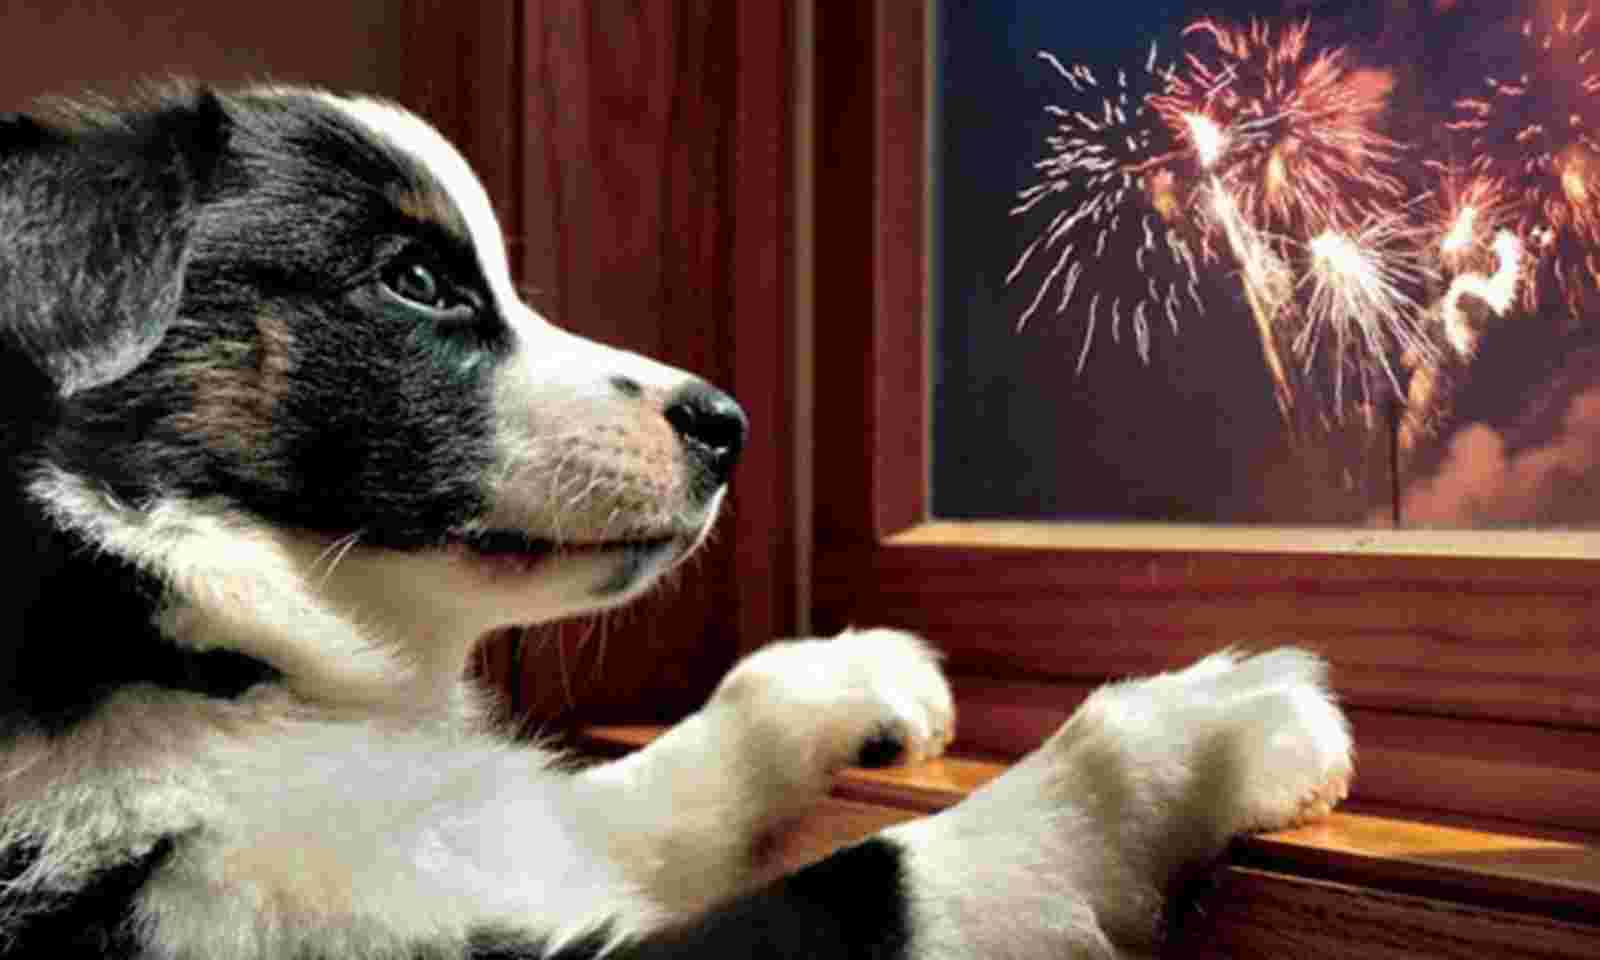 Make this Diwali a happy one for animals too: HSI